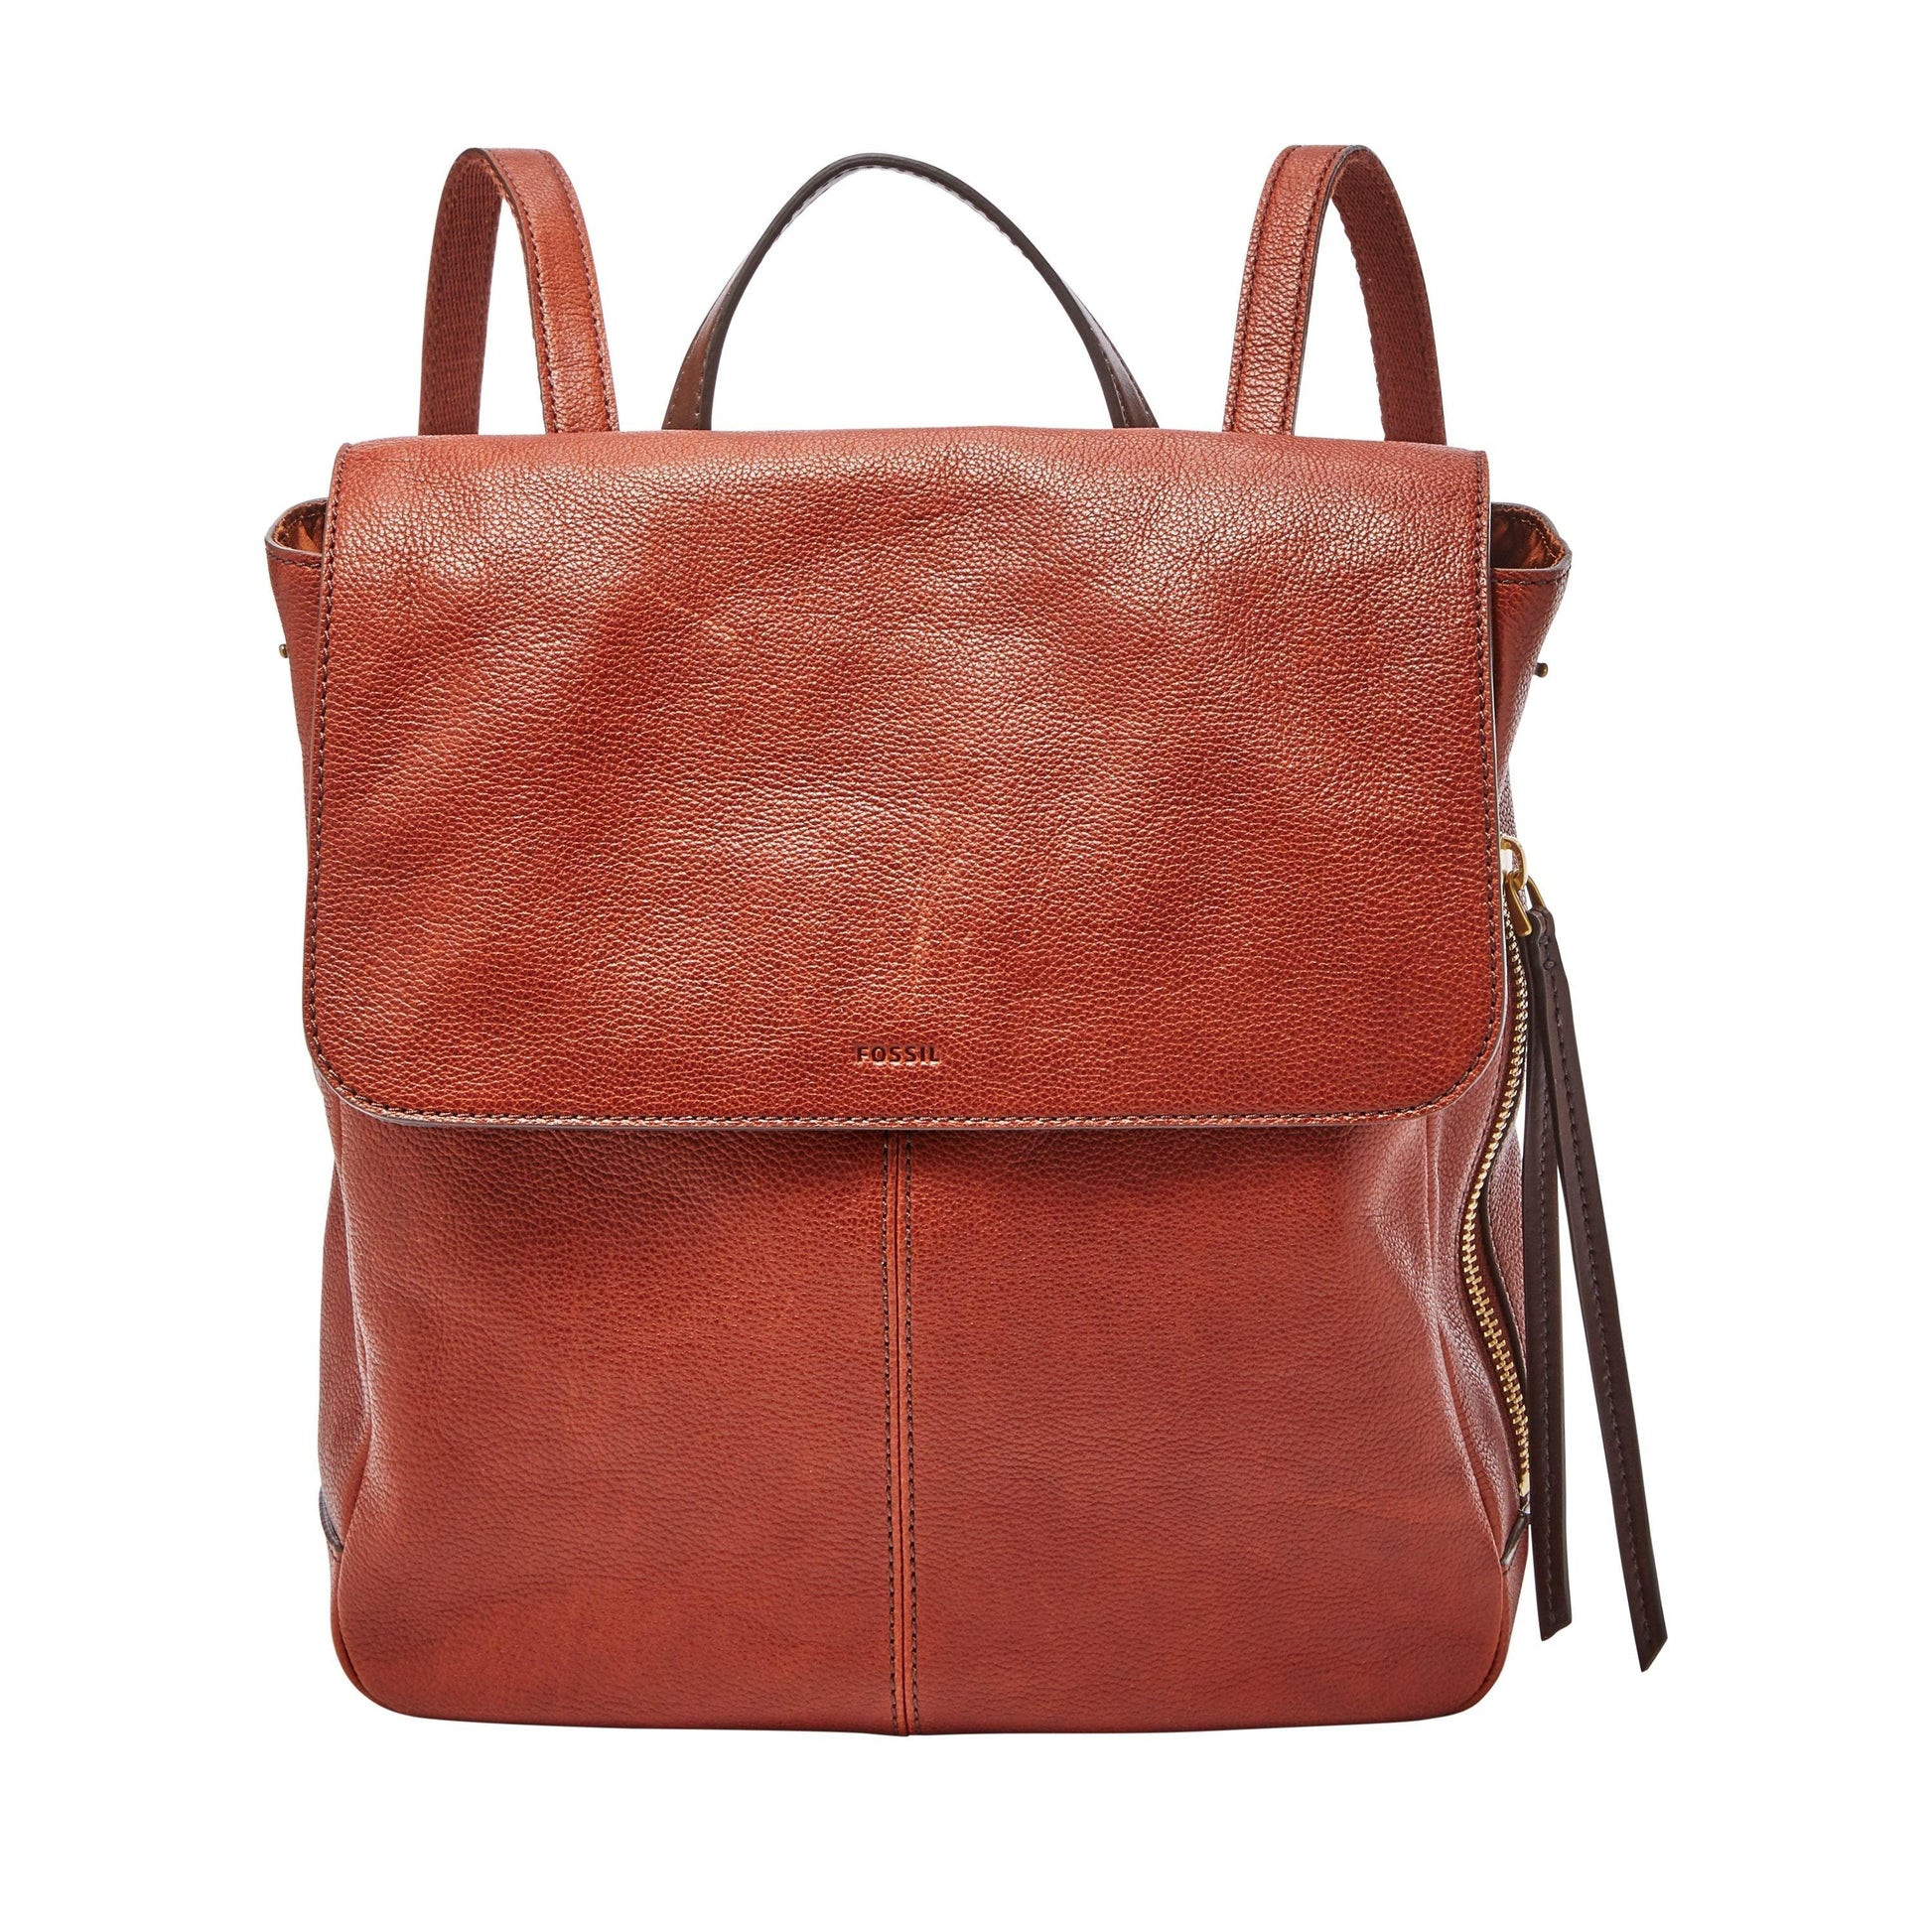 Fossil Women's Claire Leather Backpack - CADEAUME